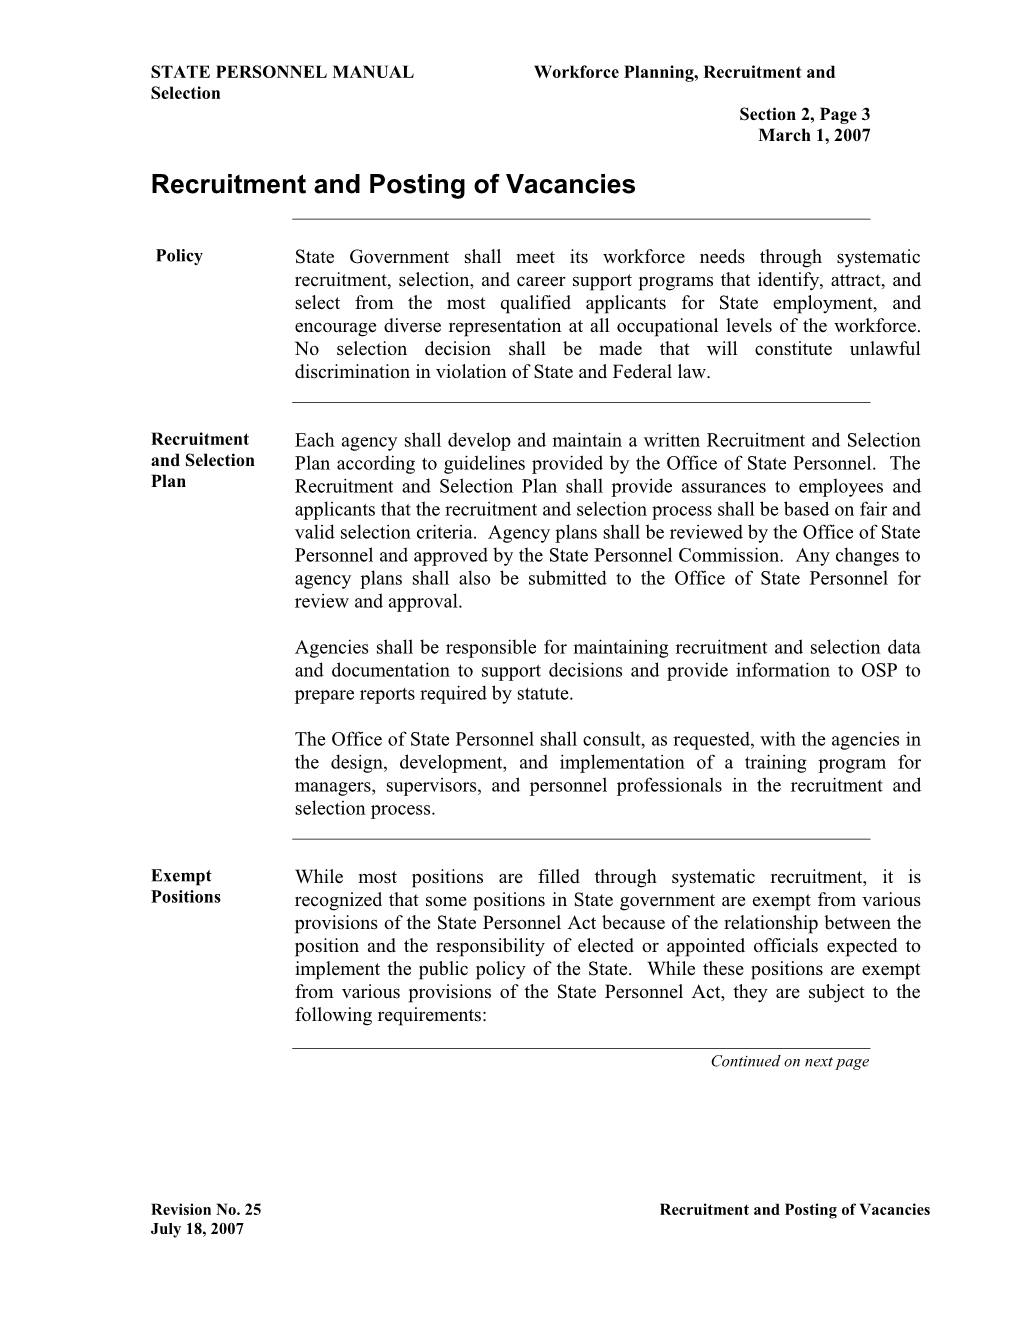 Recruitment and Posting of Vacancies